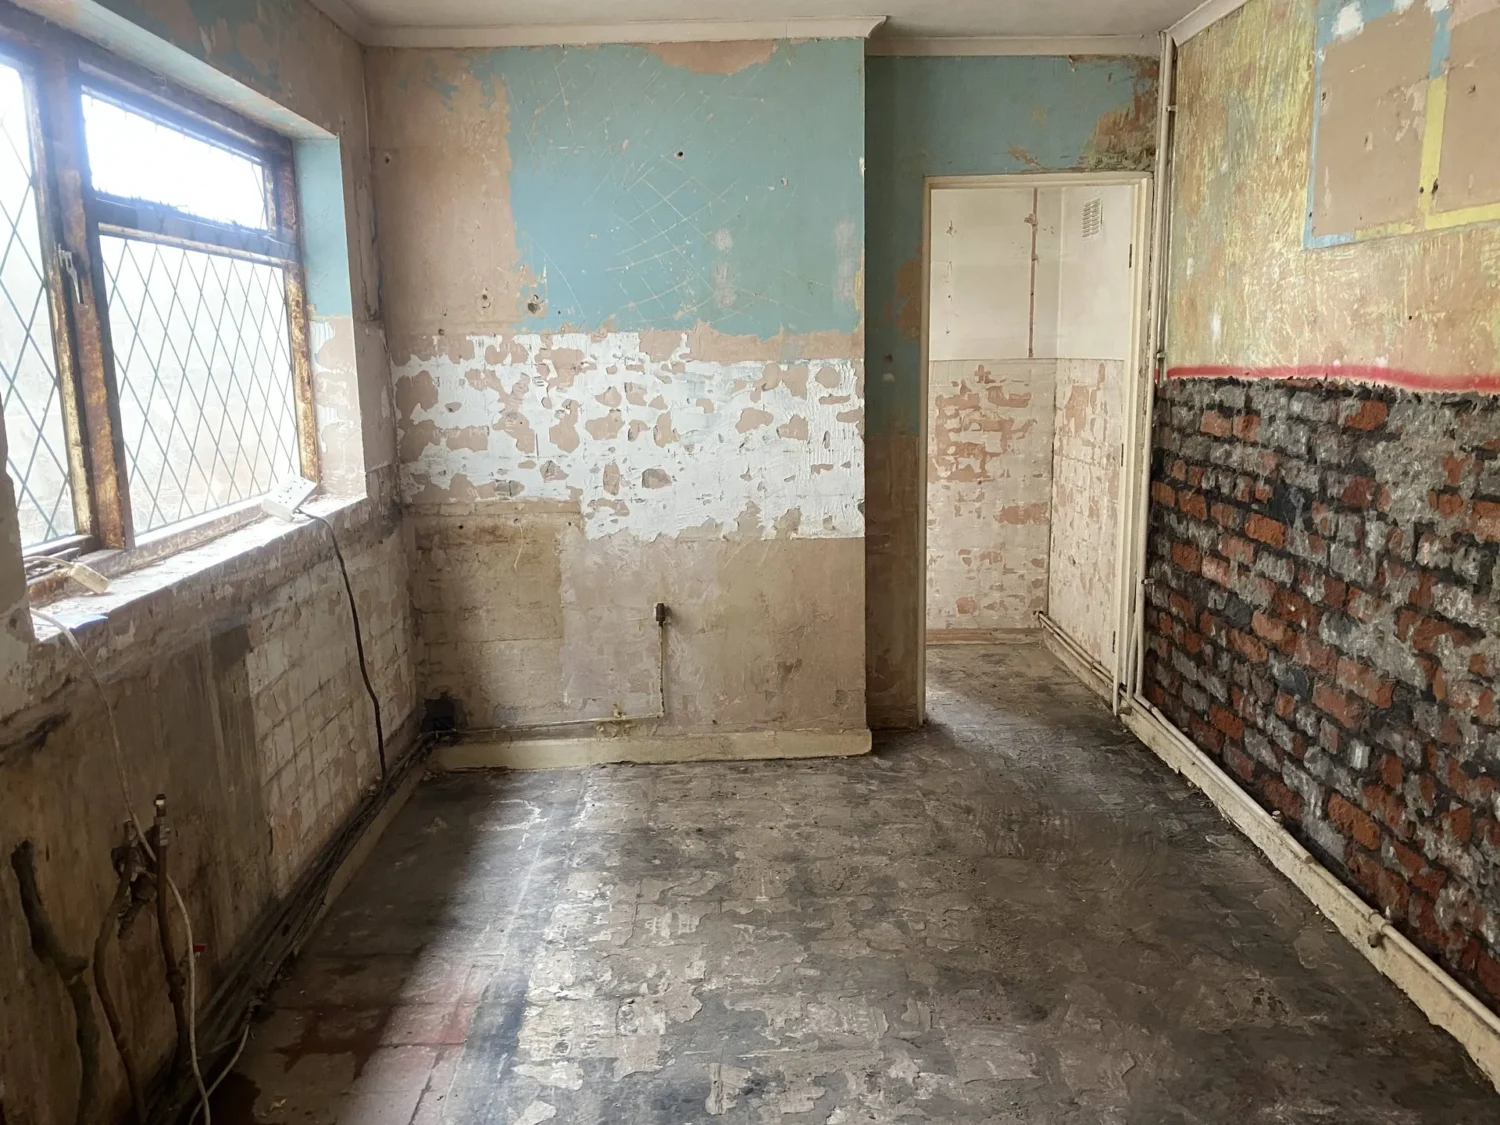 A photo of a kitchen that has been removed and stripped out